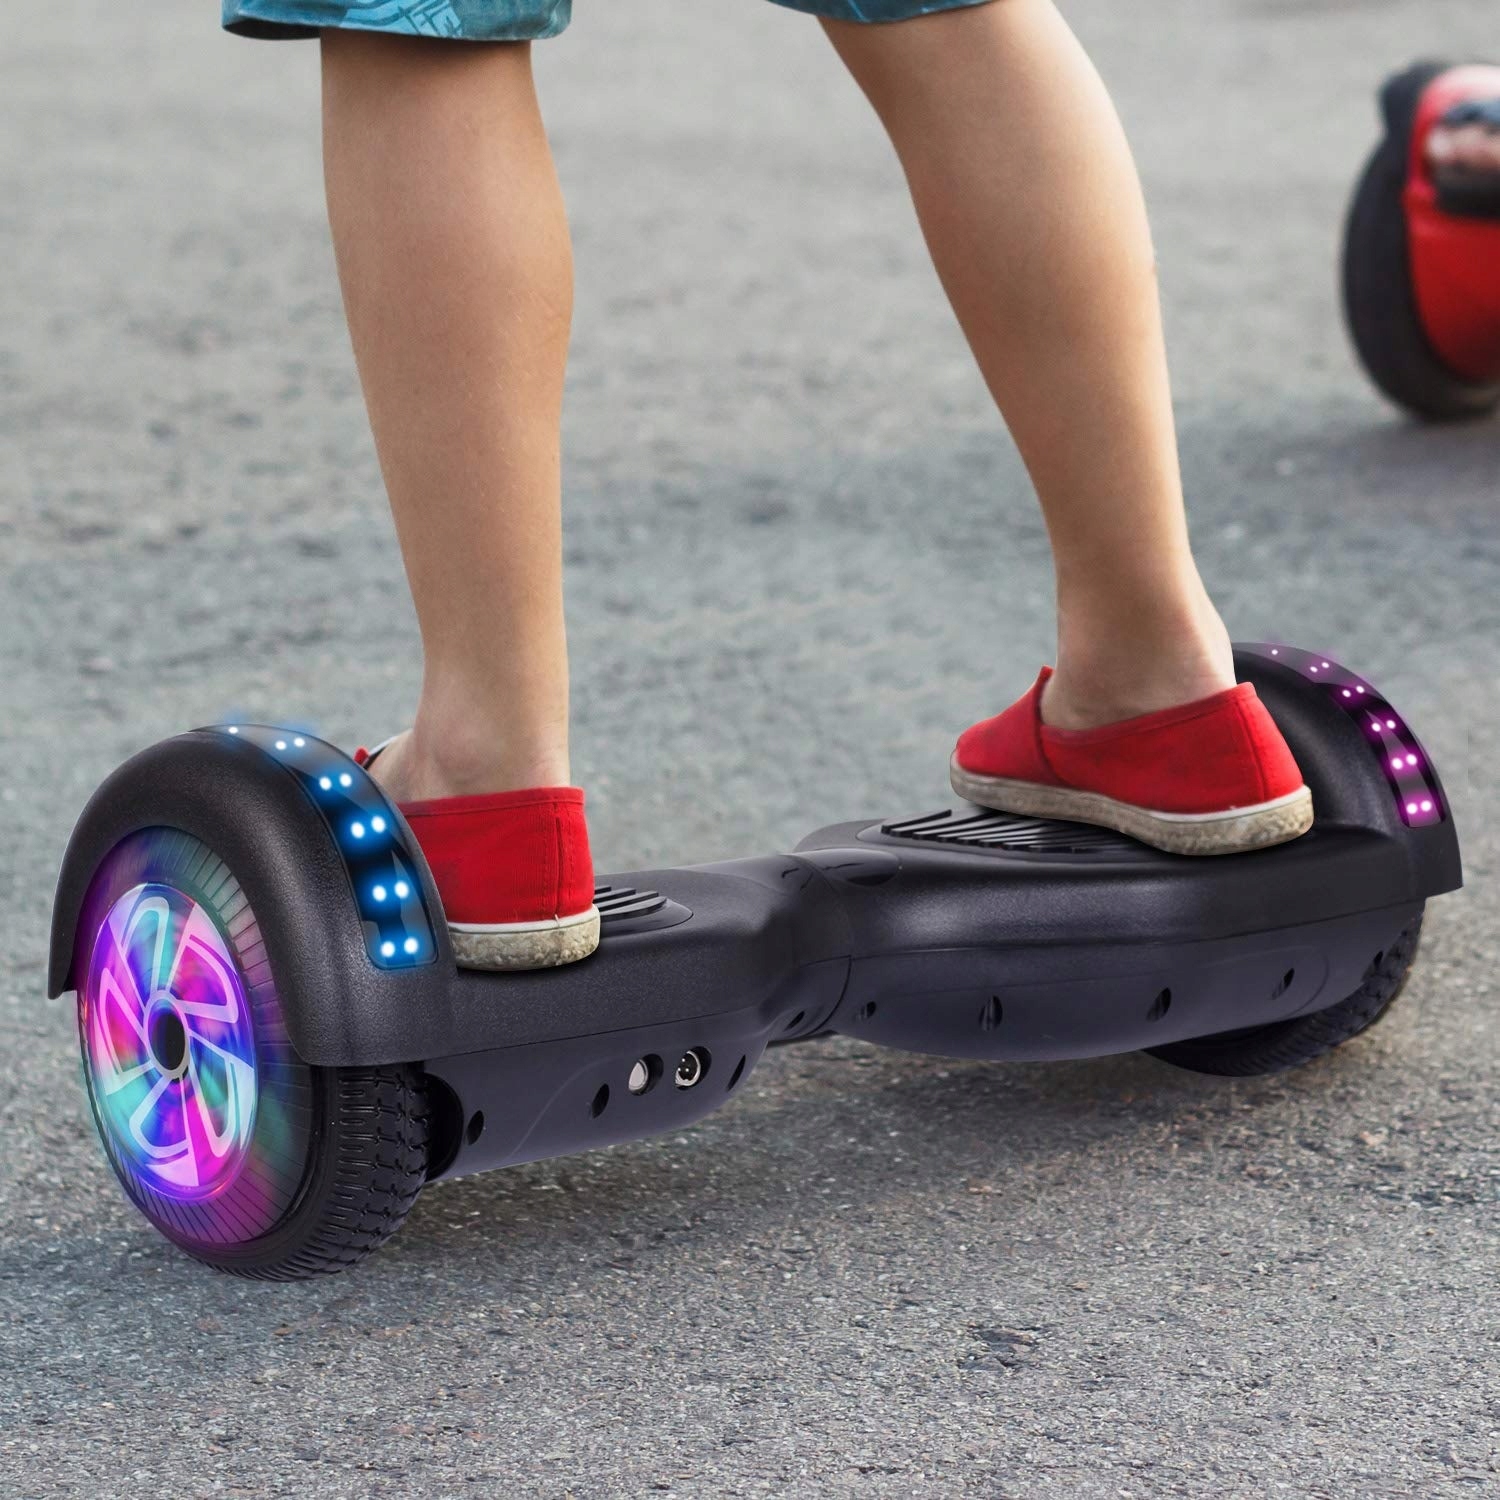 ELECTRIC HOVERBOARD 6.5 INCH BOARD Manufacturer's code CHIC D01